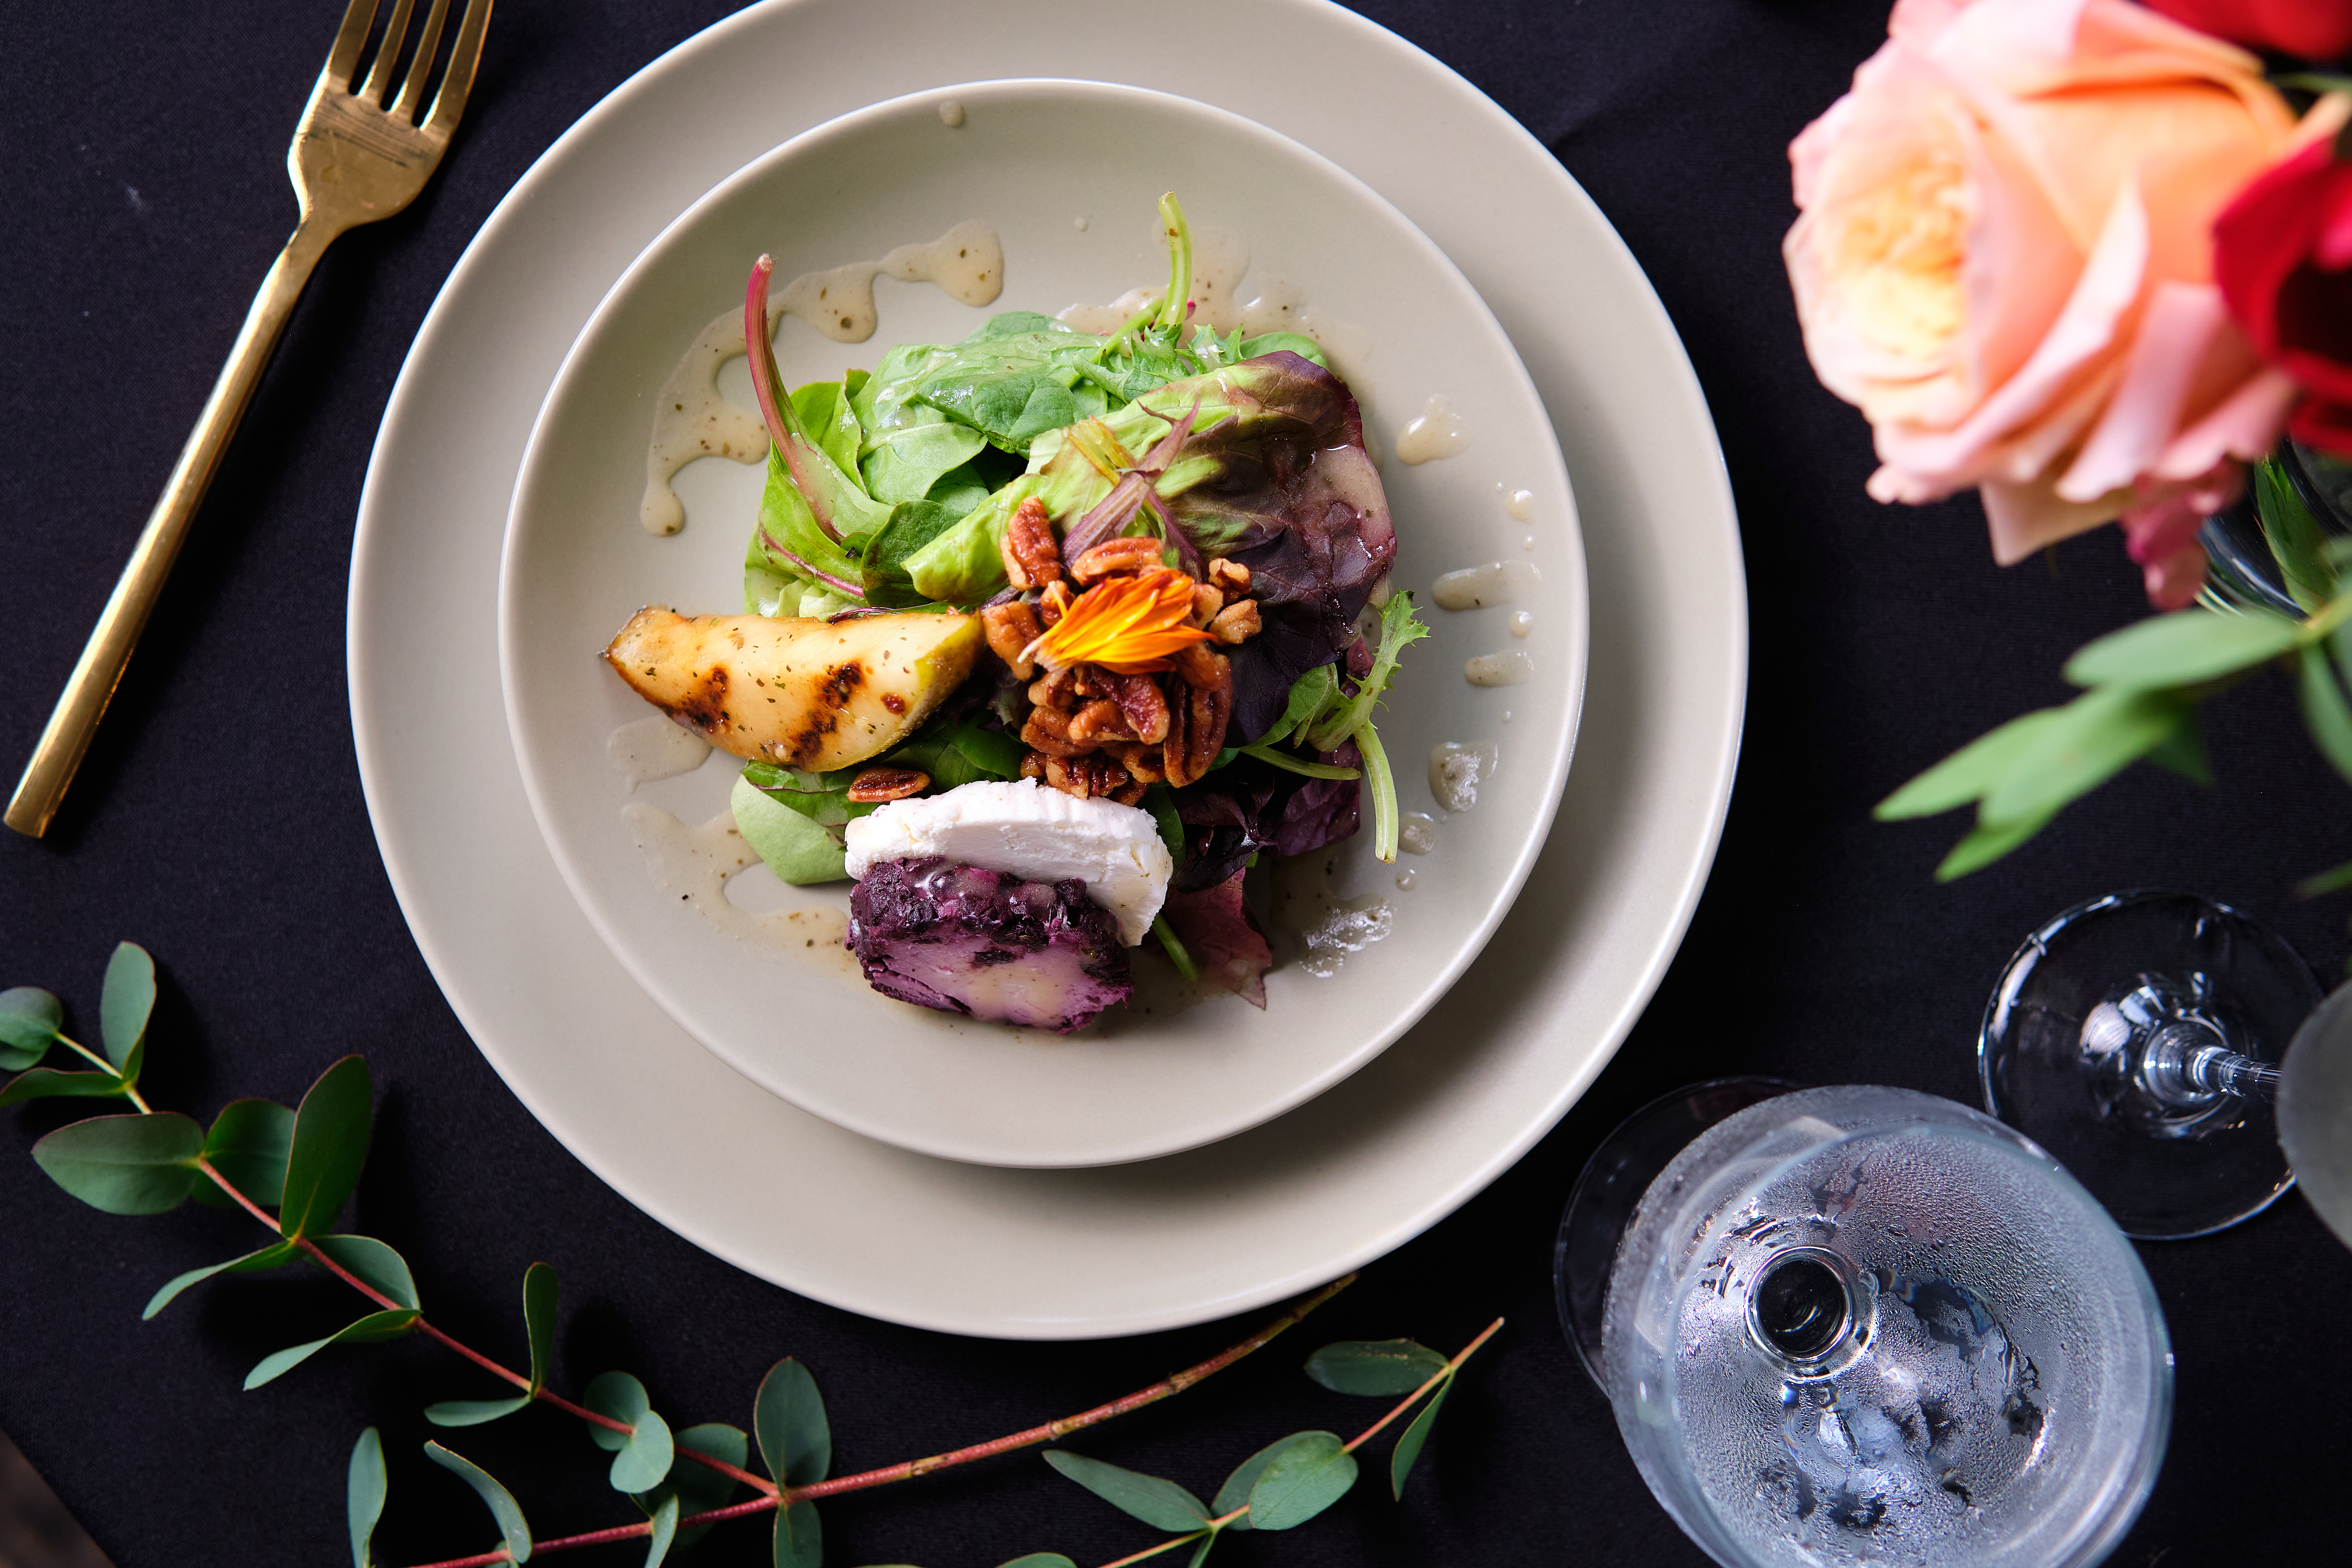 Plate of food surrounded by rose, leaves, and fork